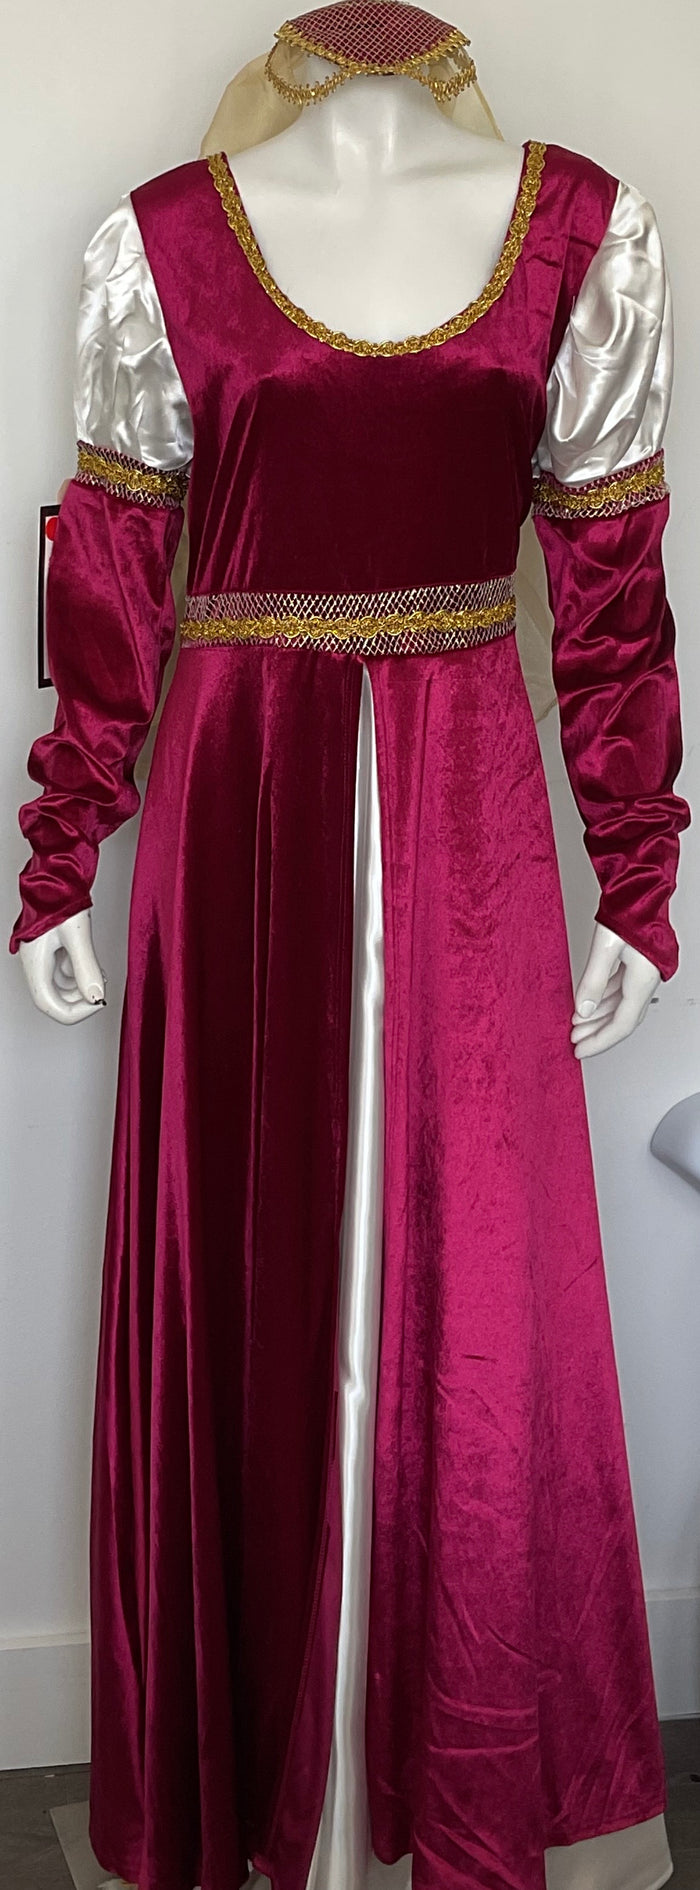 COSTUME RENTAL - A28 Lady Guinivere of Camelot - 2 pcs